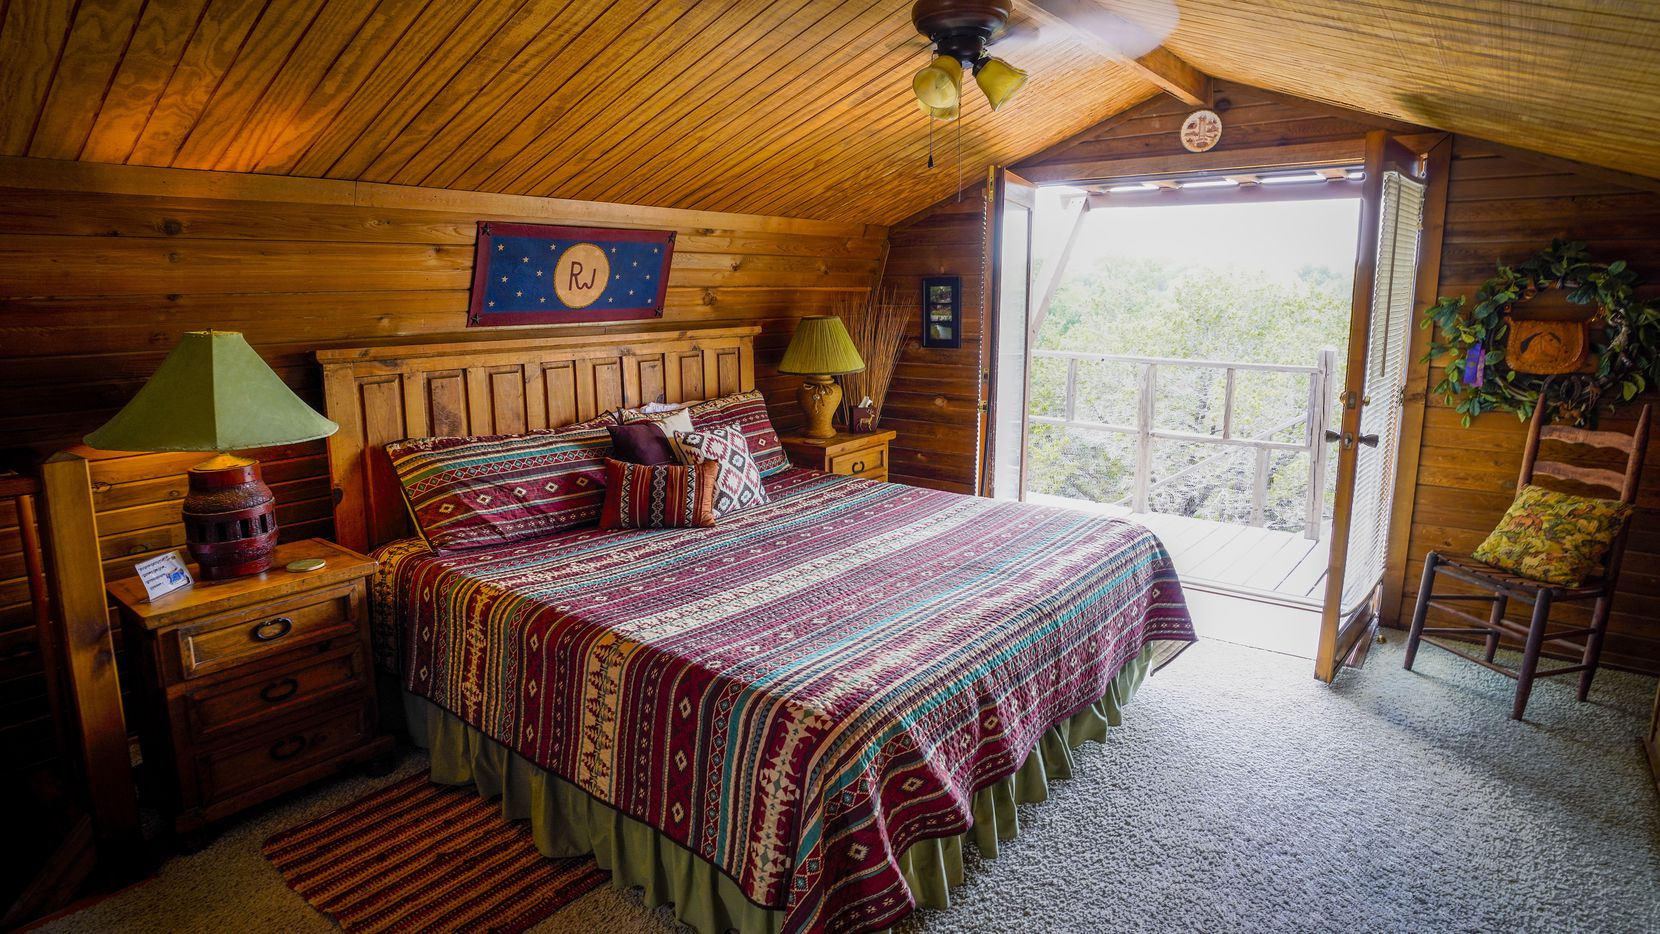 Paluxy River Bed Cabins in Glen Rose offer a tech-free stay with "no stress, no telephone, no television, no interruptions, no problem."